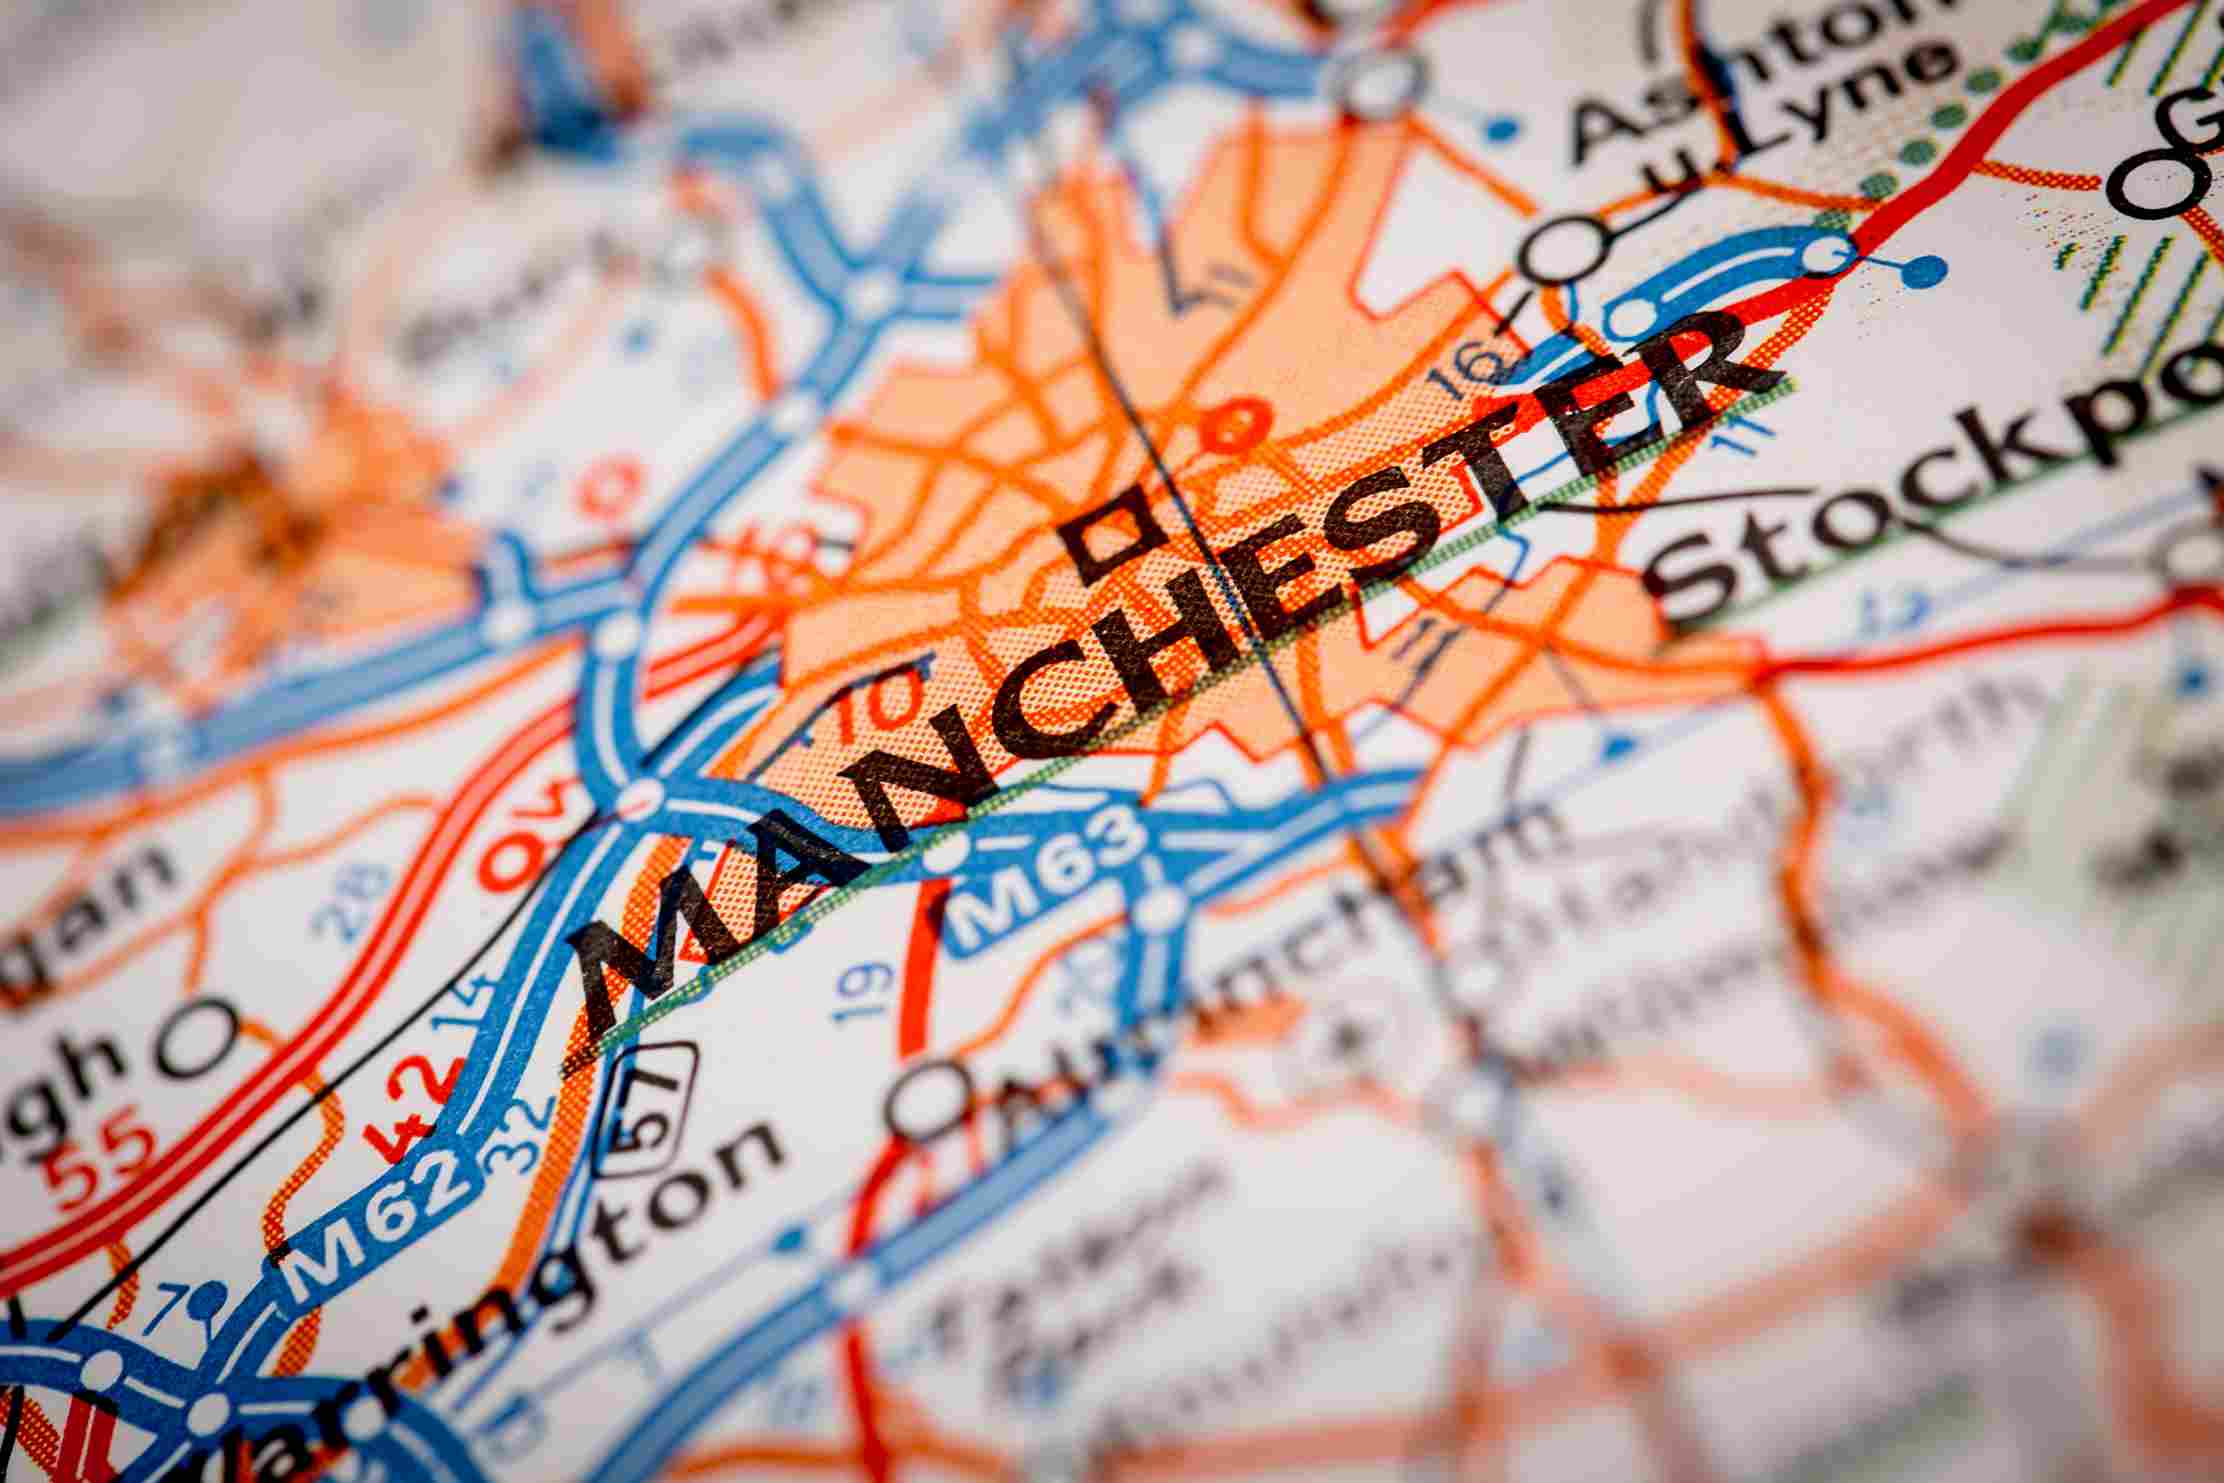 Drawing pin on the map of Manchester